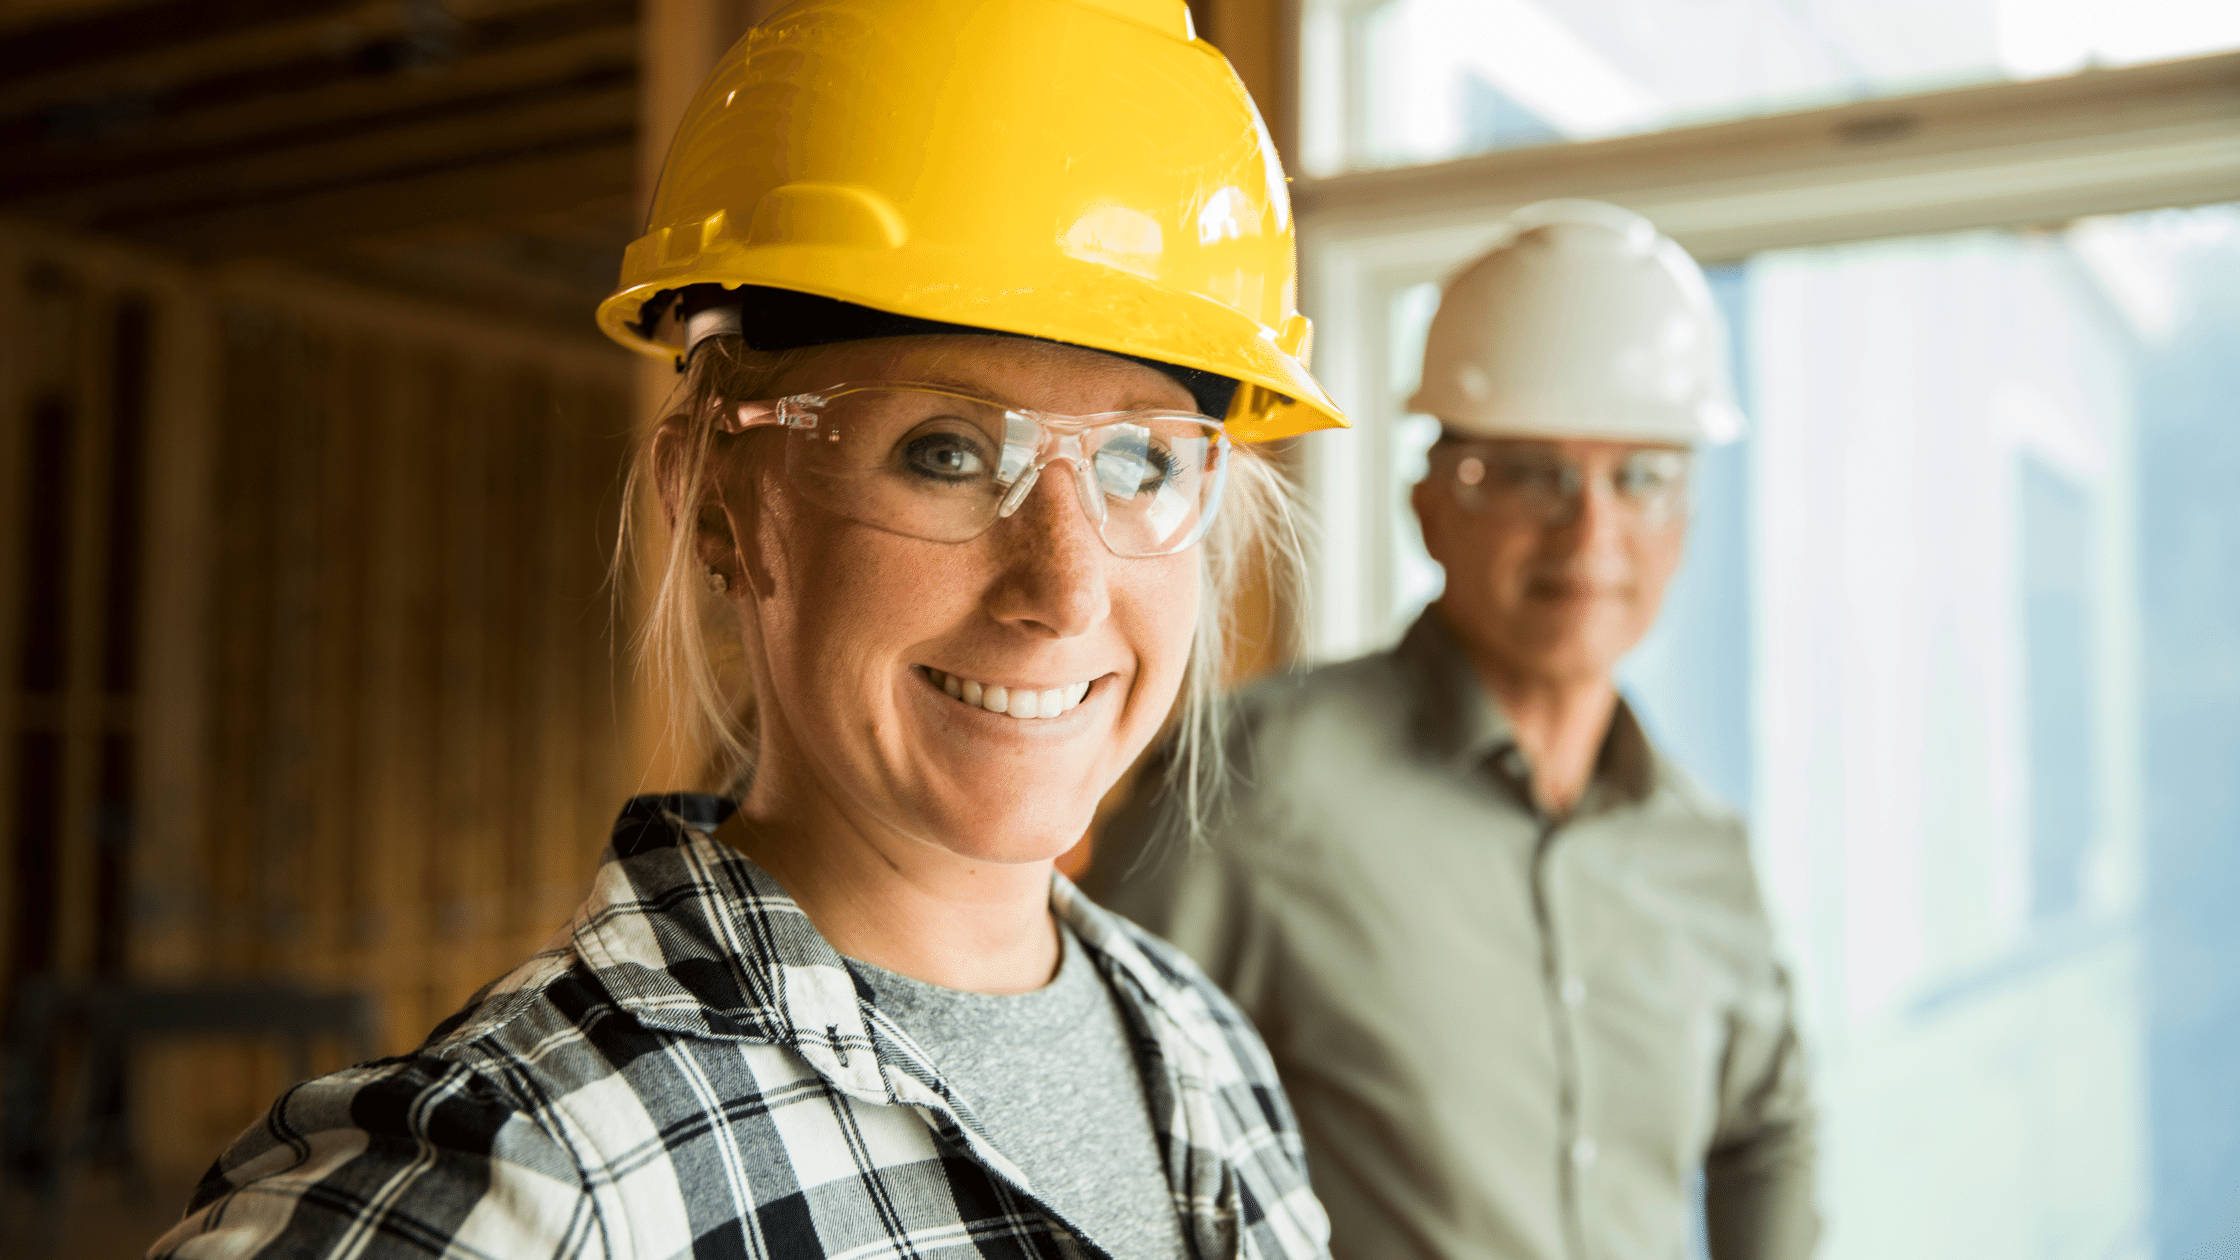 How To Help Women Workers Feel Welcome In The Construction Industry